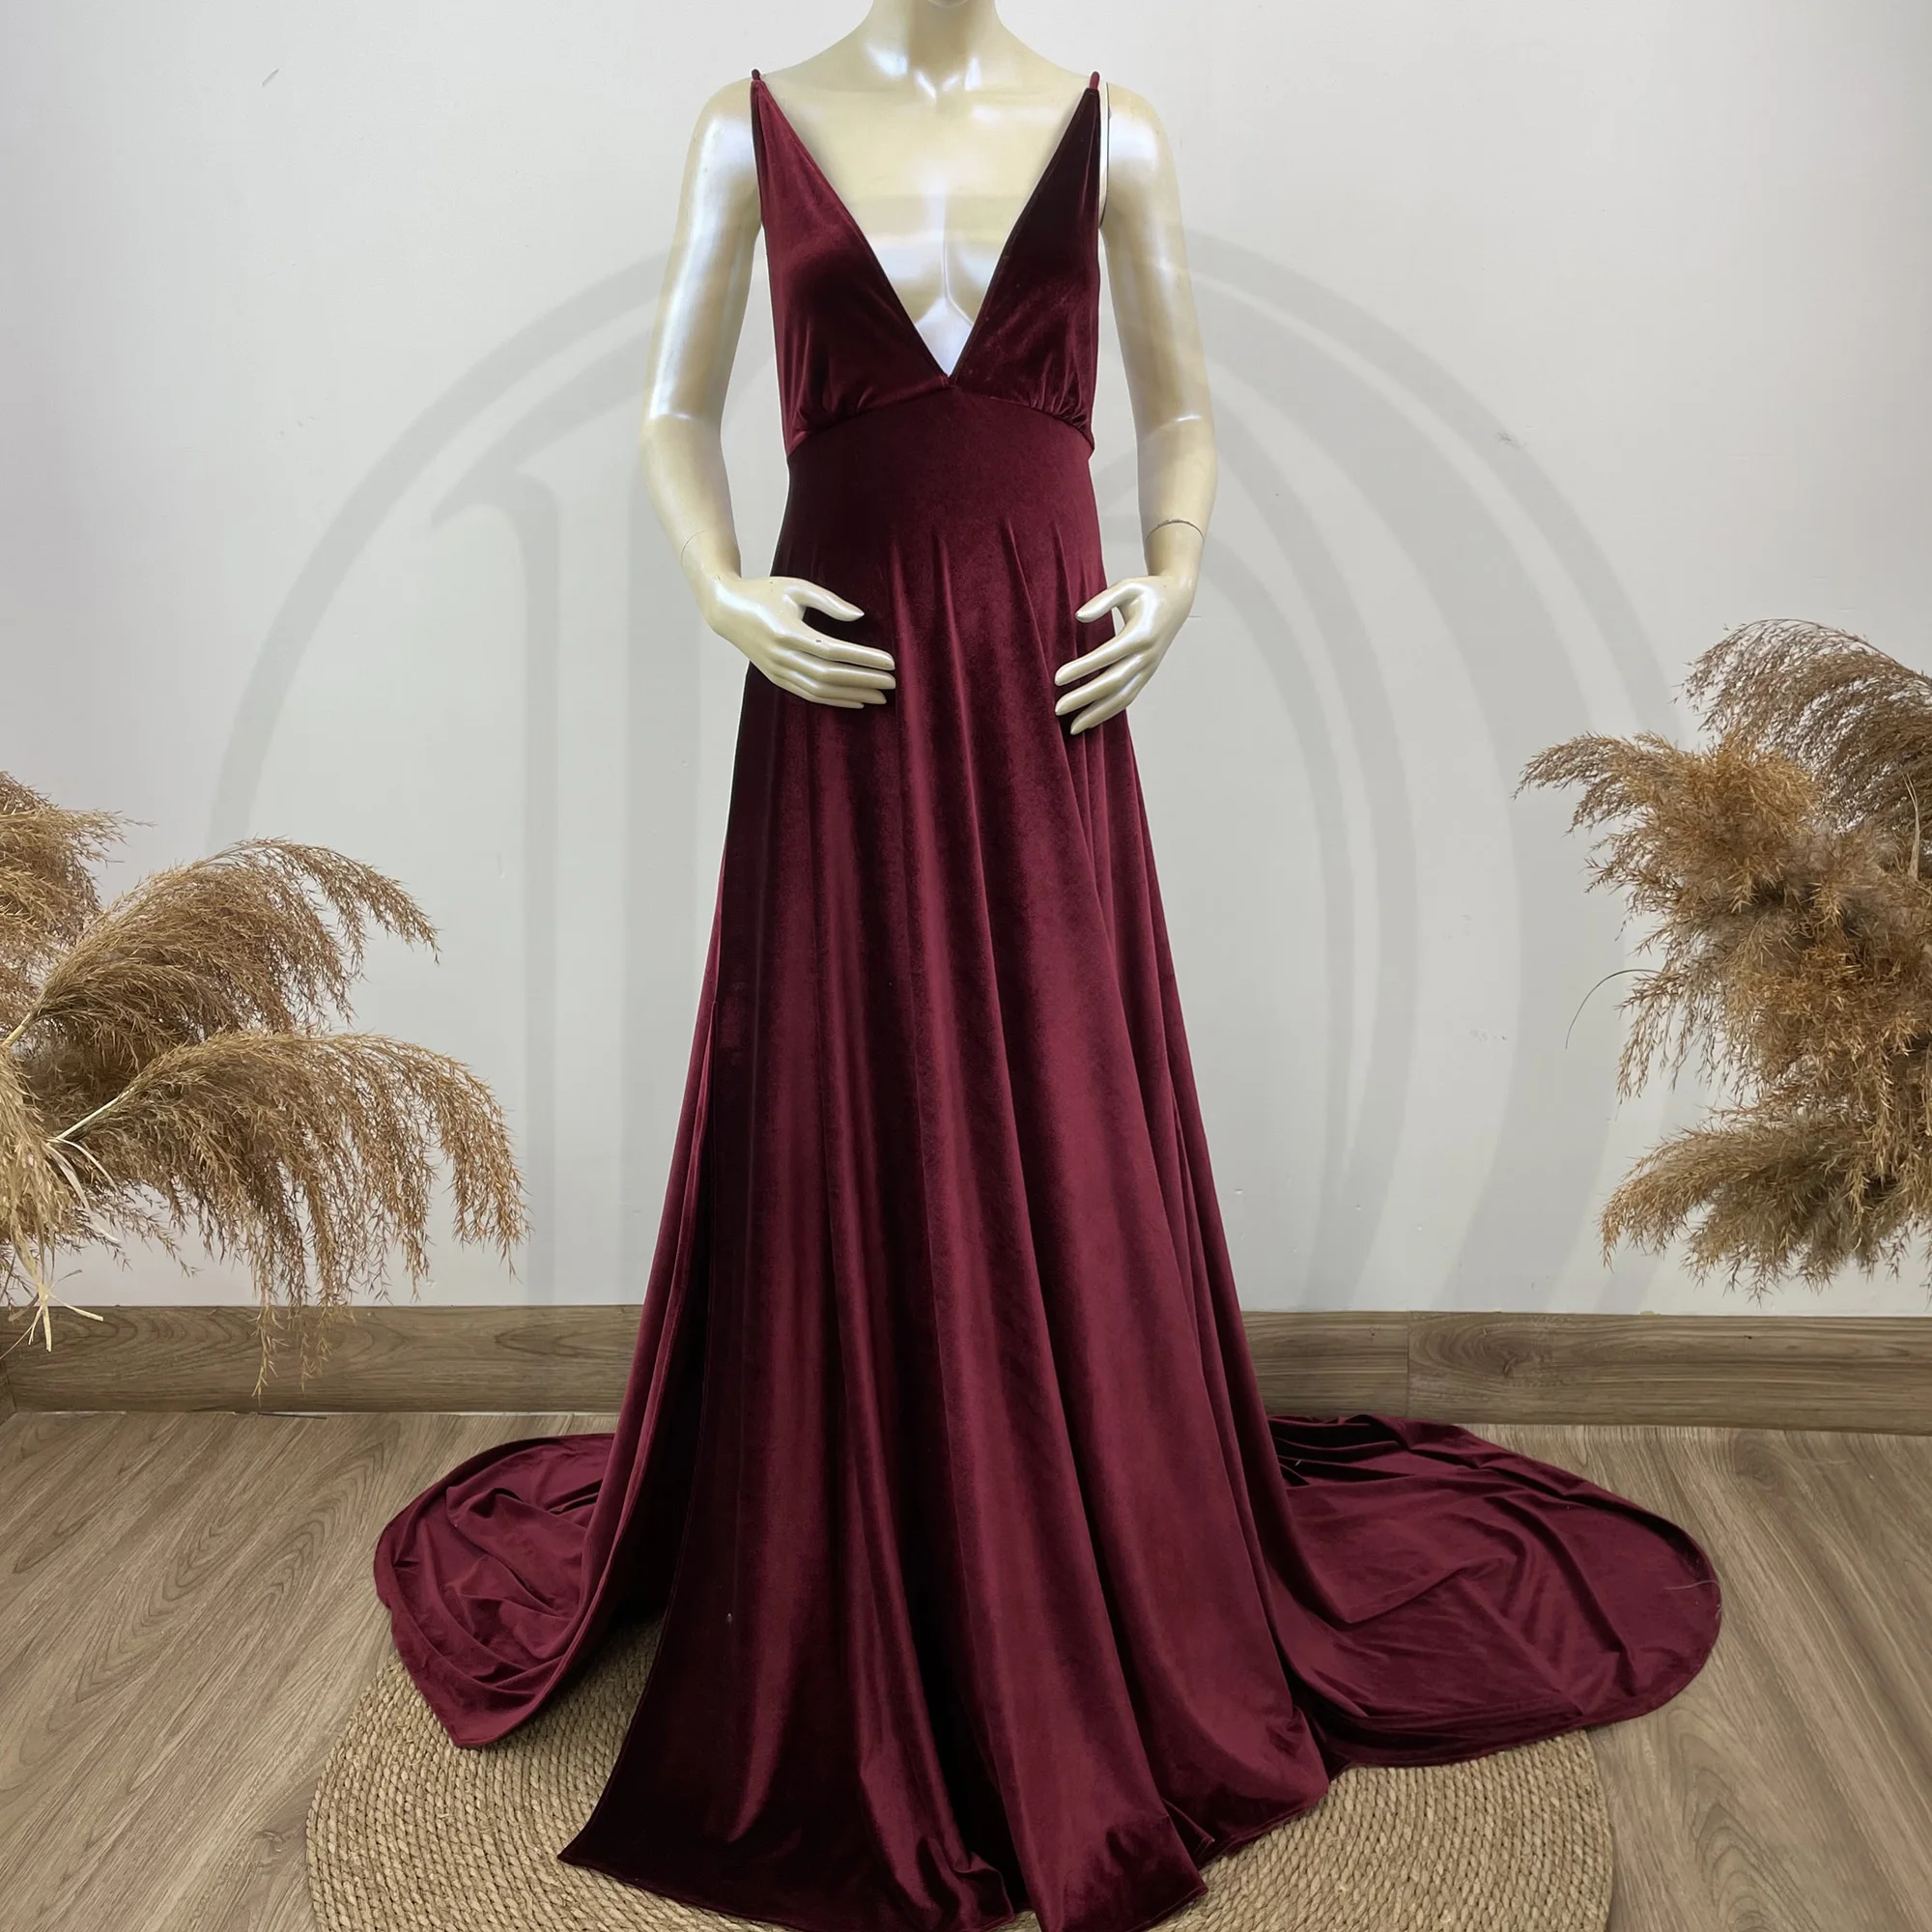 Enlarge Soft Maxi Long Deep V Maternity Dress Pregnant Velvet Gown Evening Party Robe for Woman Photography Prop Baby Shower Costume